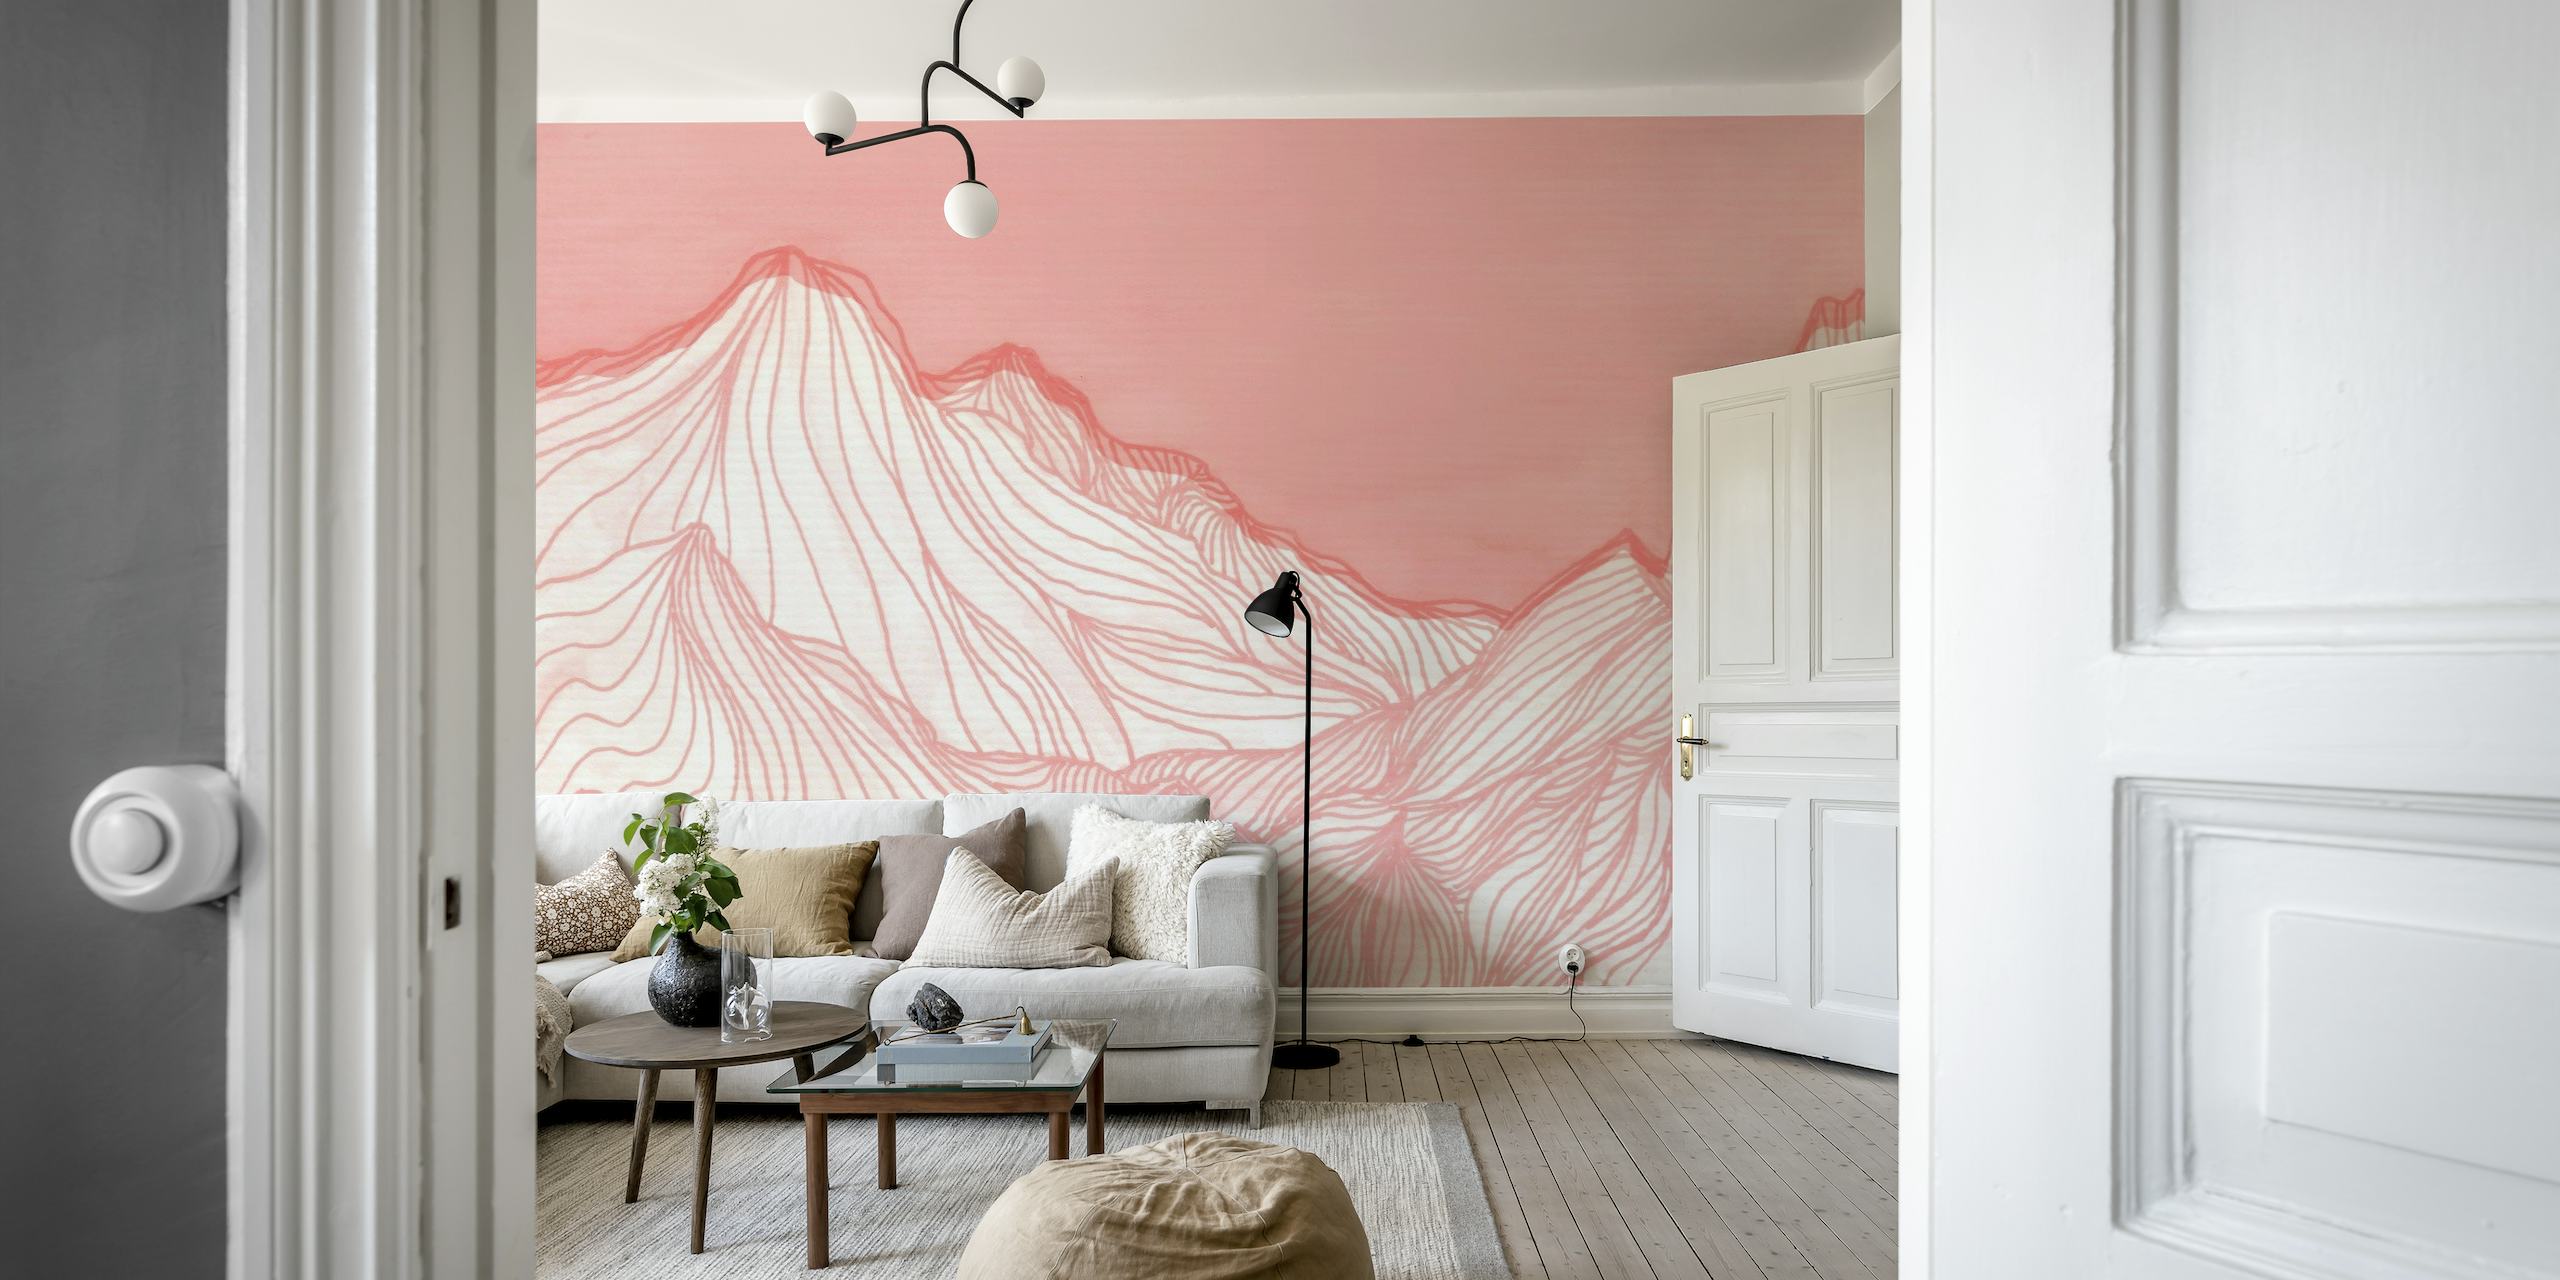 Abstract pink and white line art of mountain peaks forming a serene wall mural